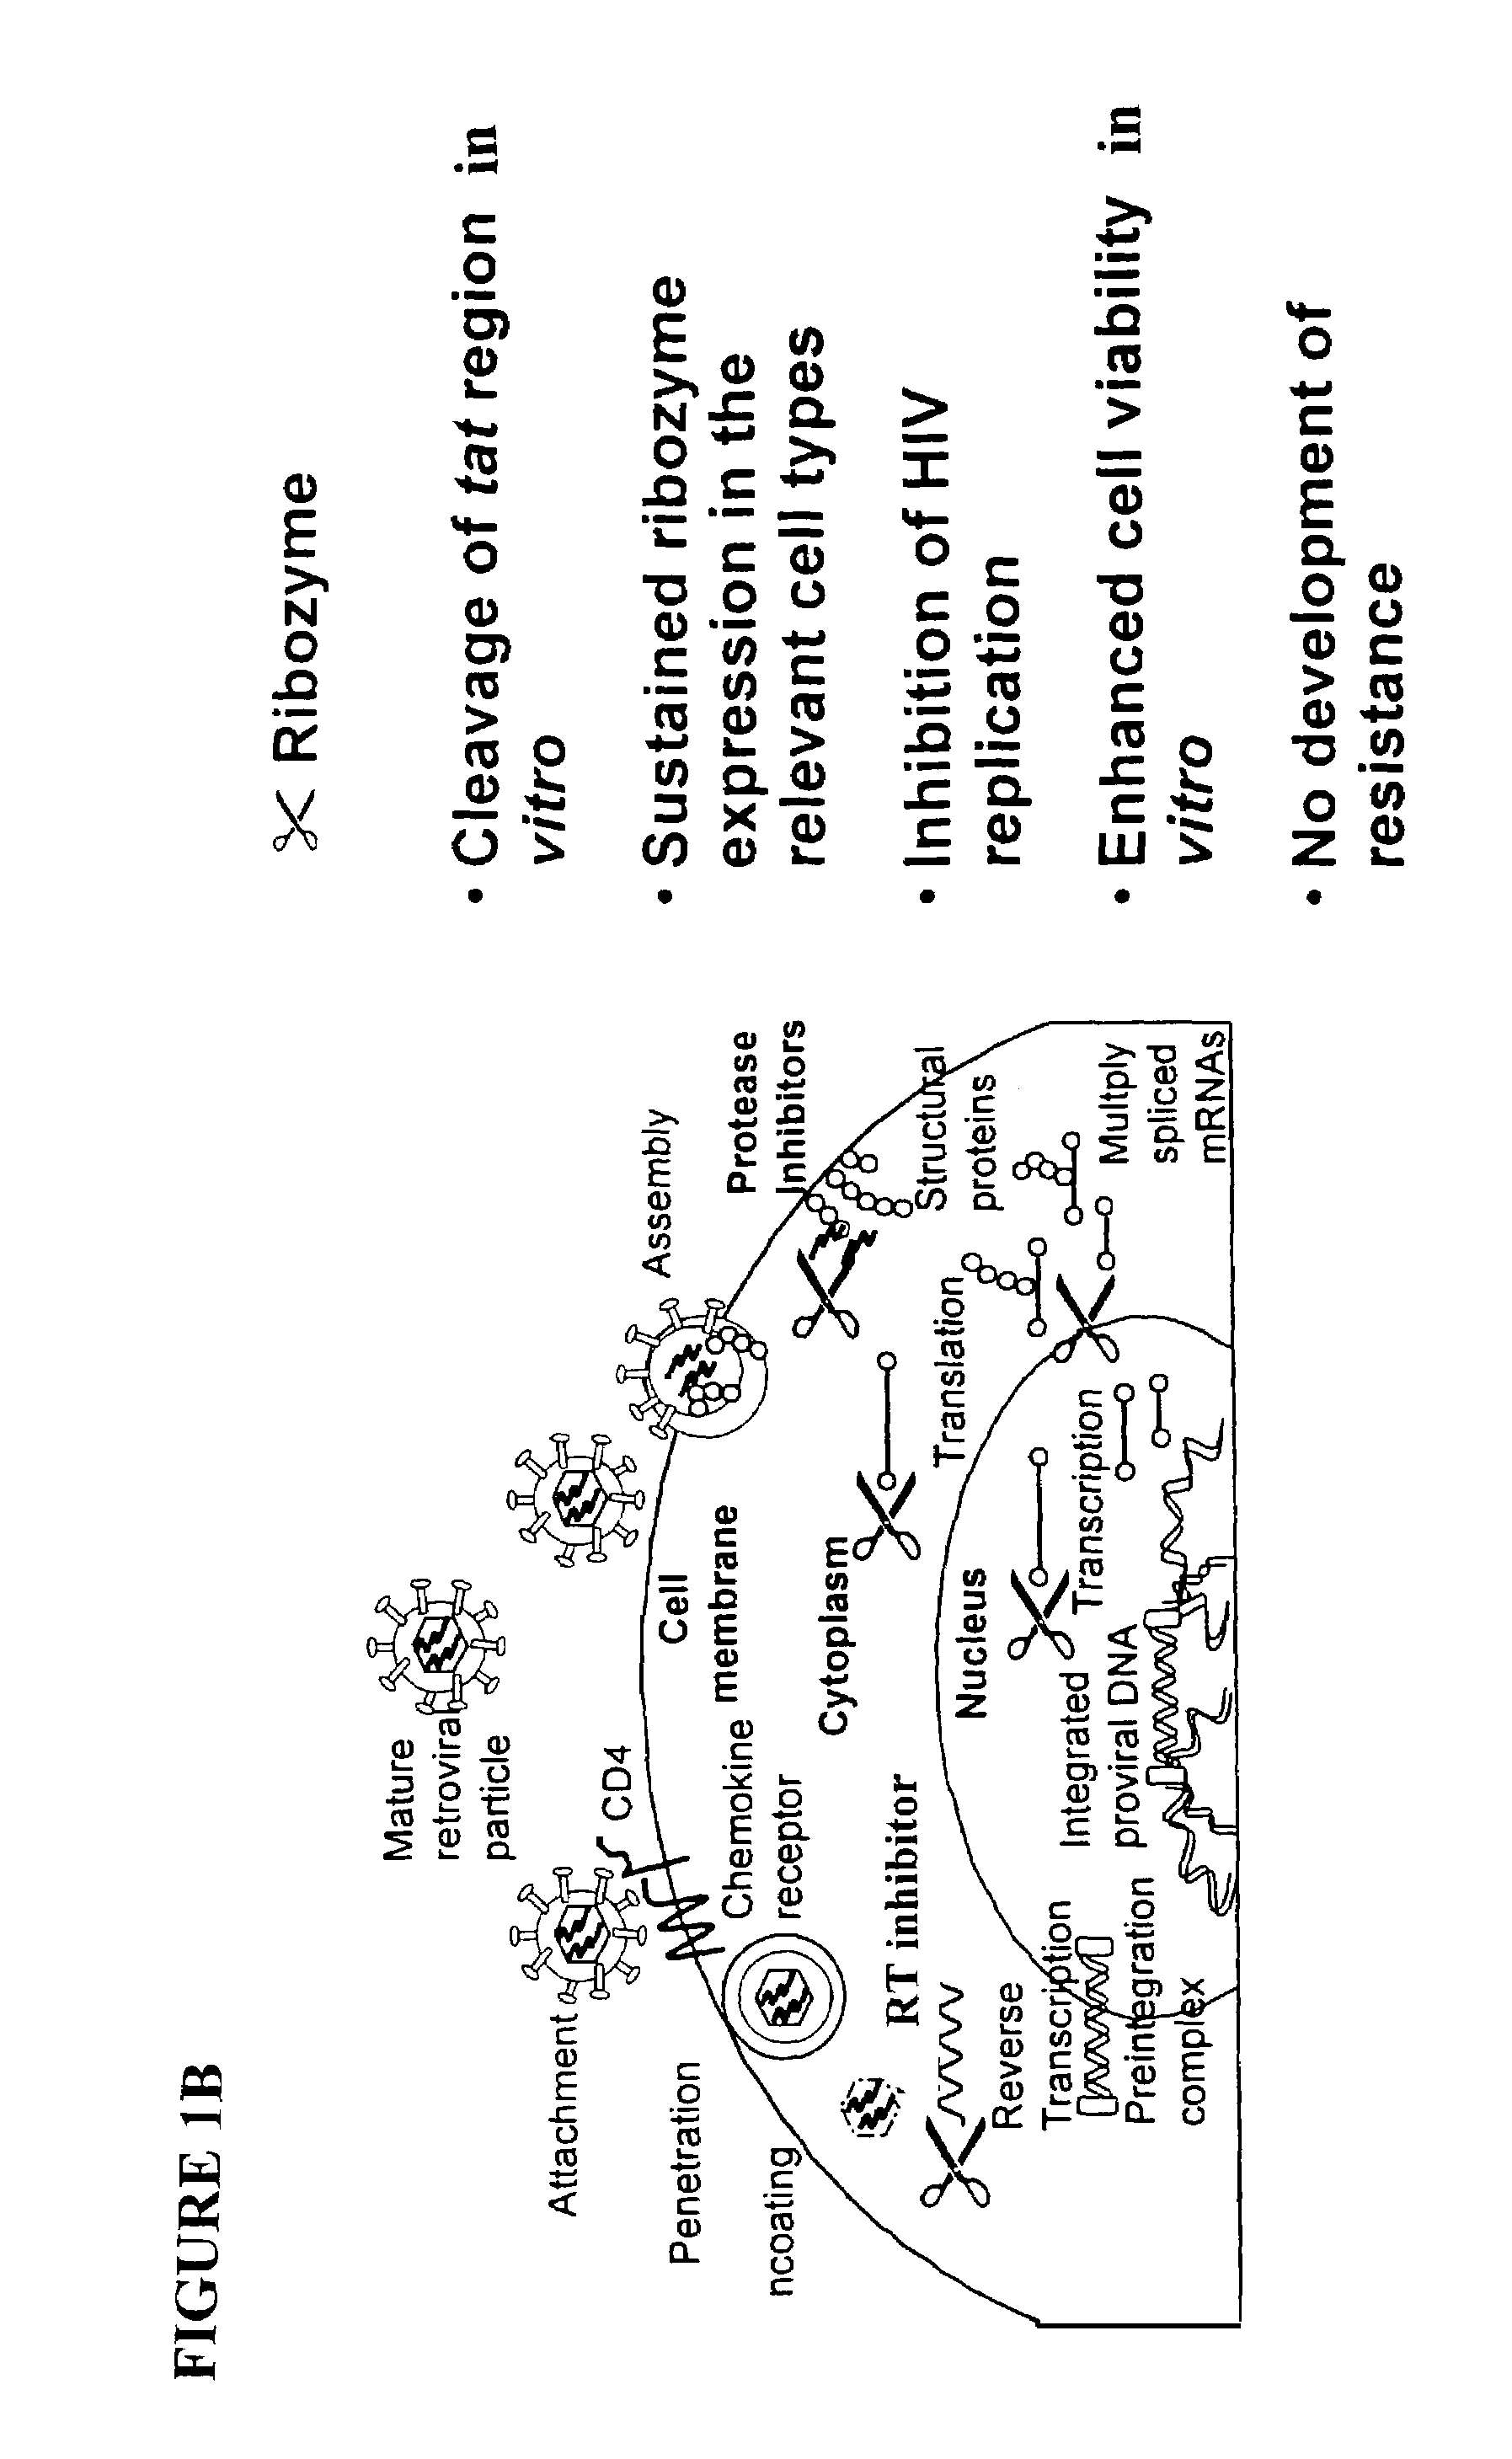 Methods for genetic modification of hematopoietic progenitor cells and uses of the modified cells